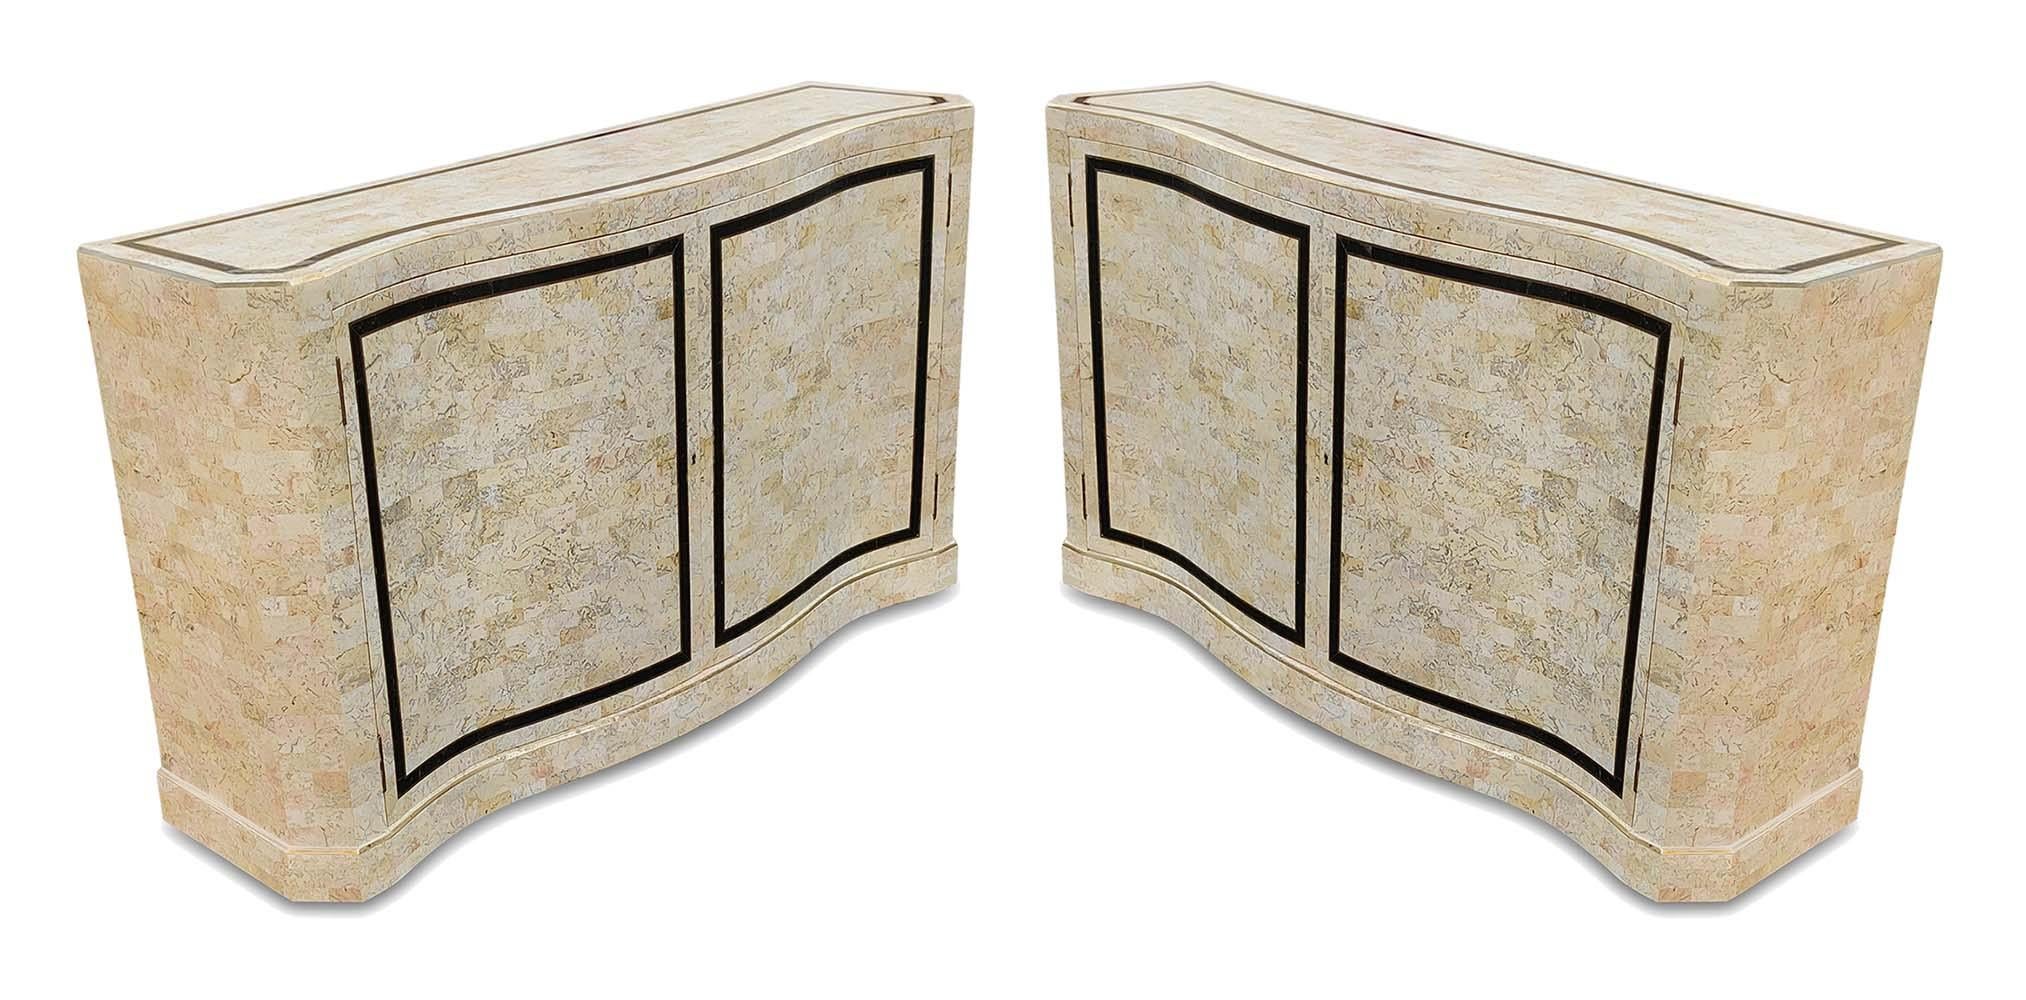 Maitland-Smith tessellated stone and brass two-door cabinets with scroll design in the Hollywood Regency style. Each cabinet features an interior lined with mahogany and one removable mahogany shelf. Locking keys present. Foil label on back, brass